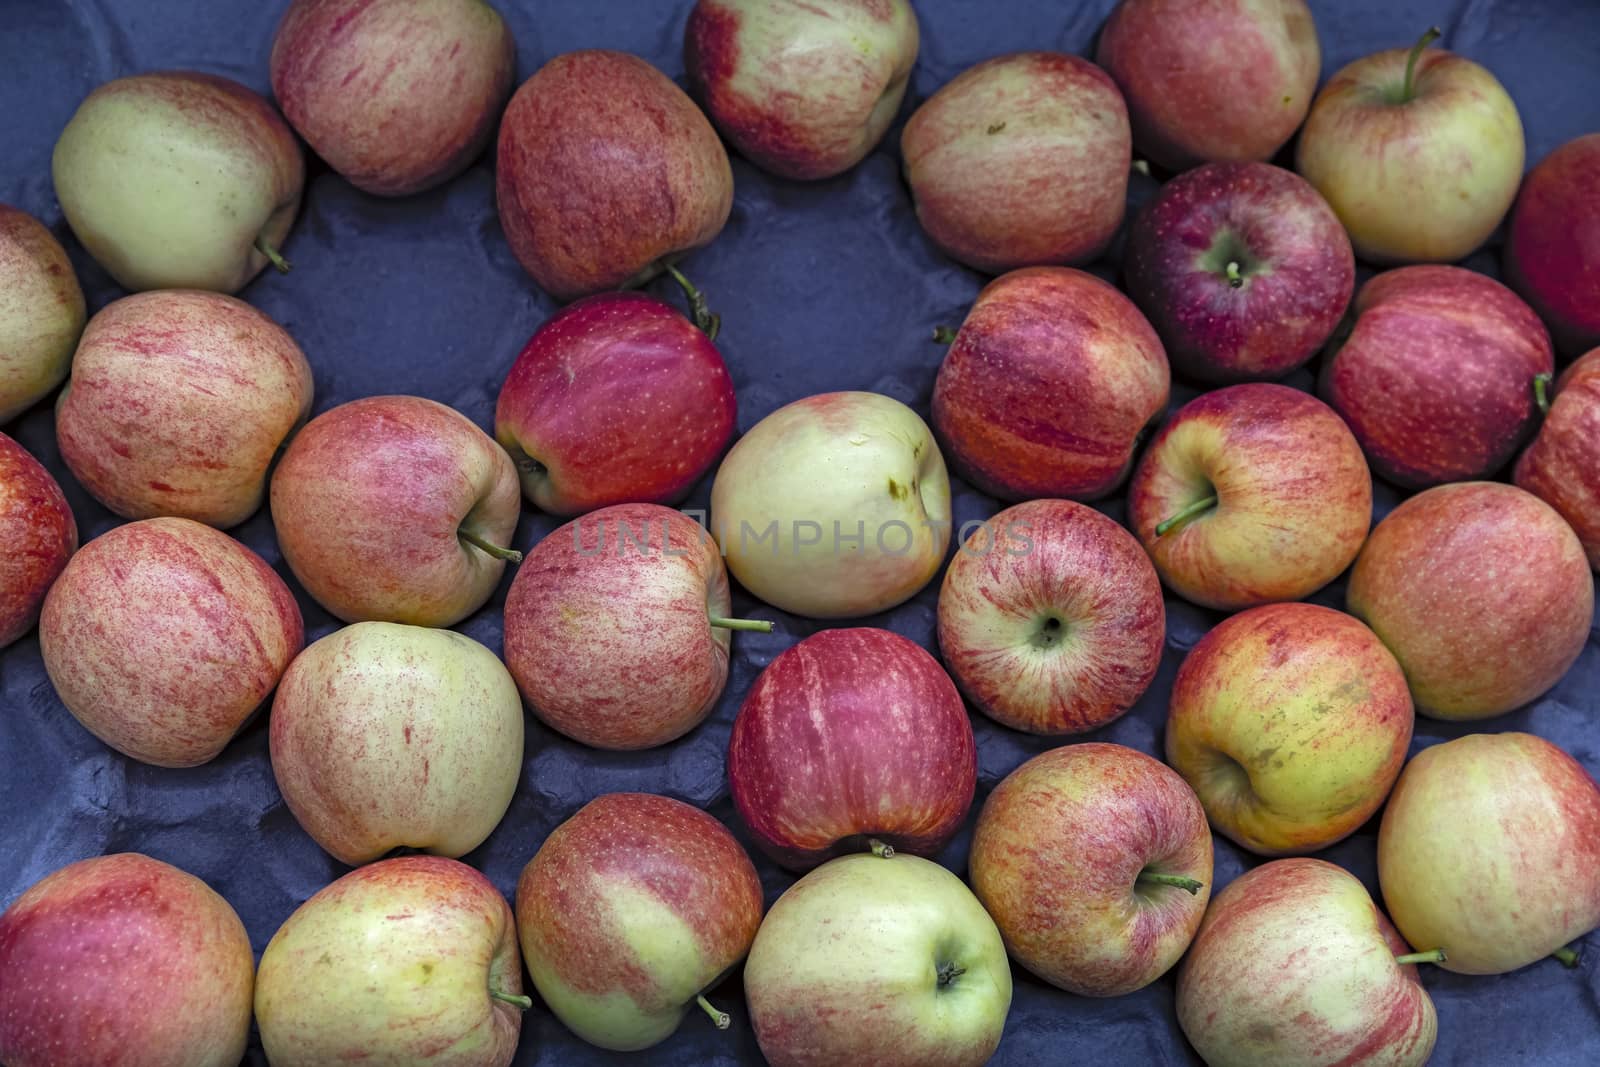 Seasonal fruits are placed in boxes in the grocery store. Close-up of fresh delicious apples. Natural foods rich in vitamins for a healthy diet.